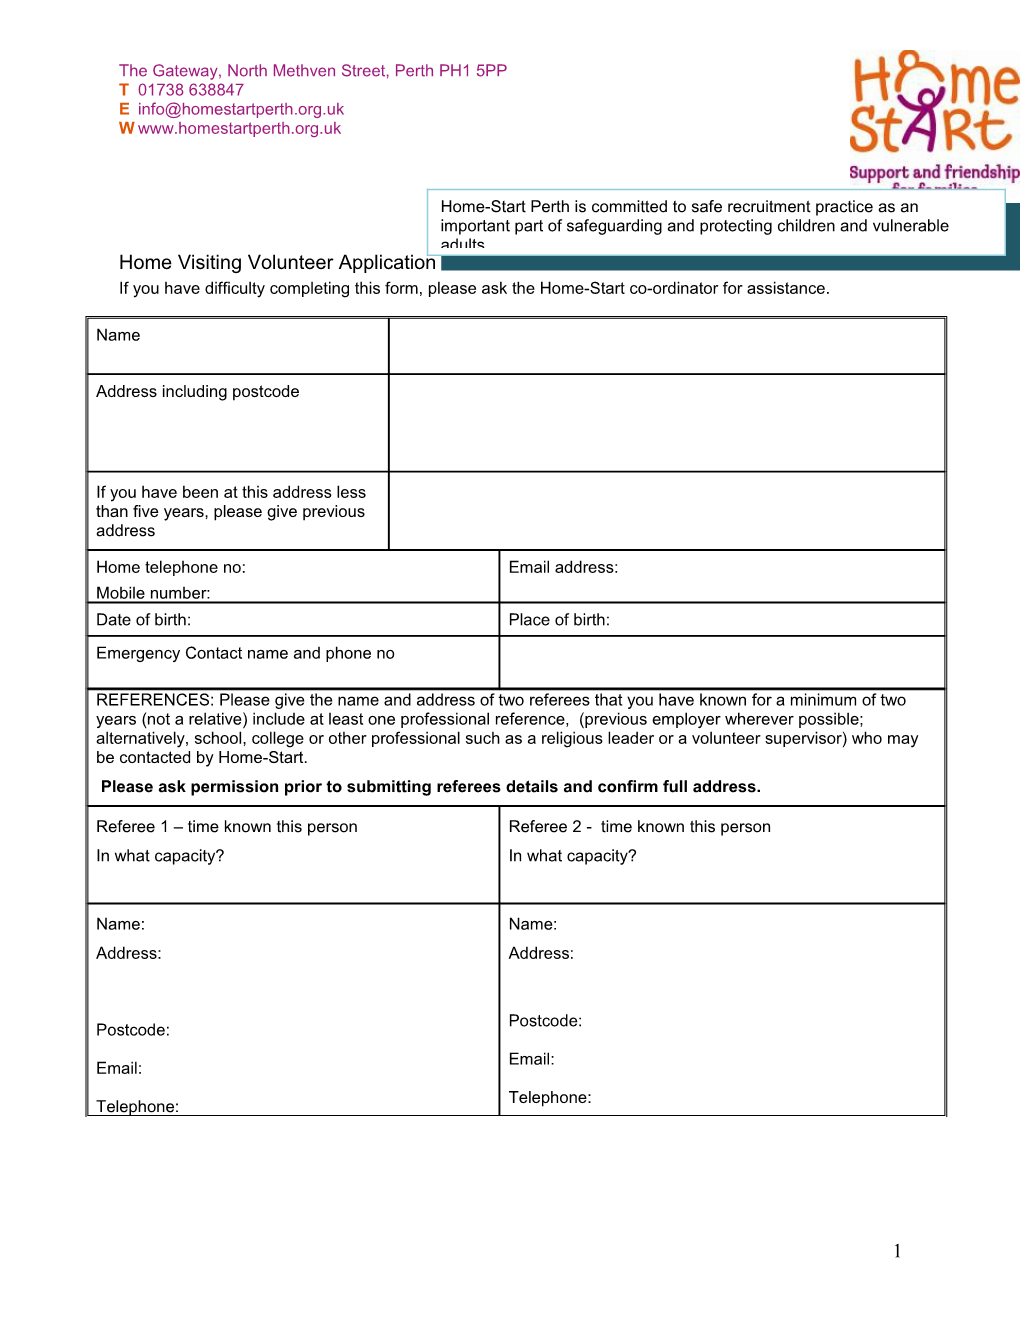 Home Visiting Volunteer Application Form - Confidential